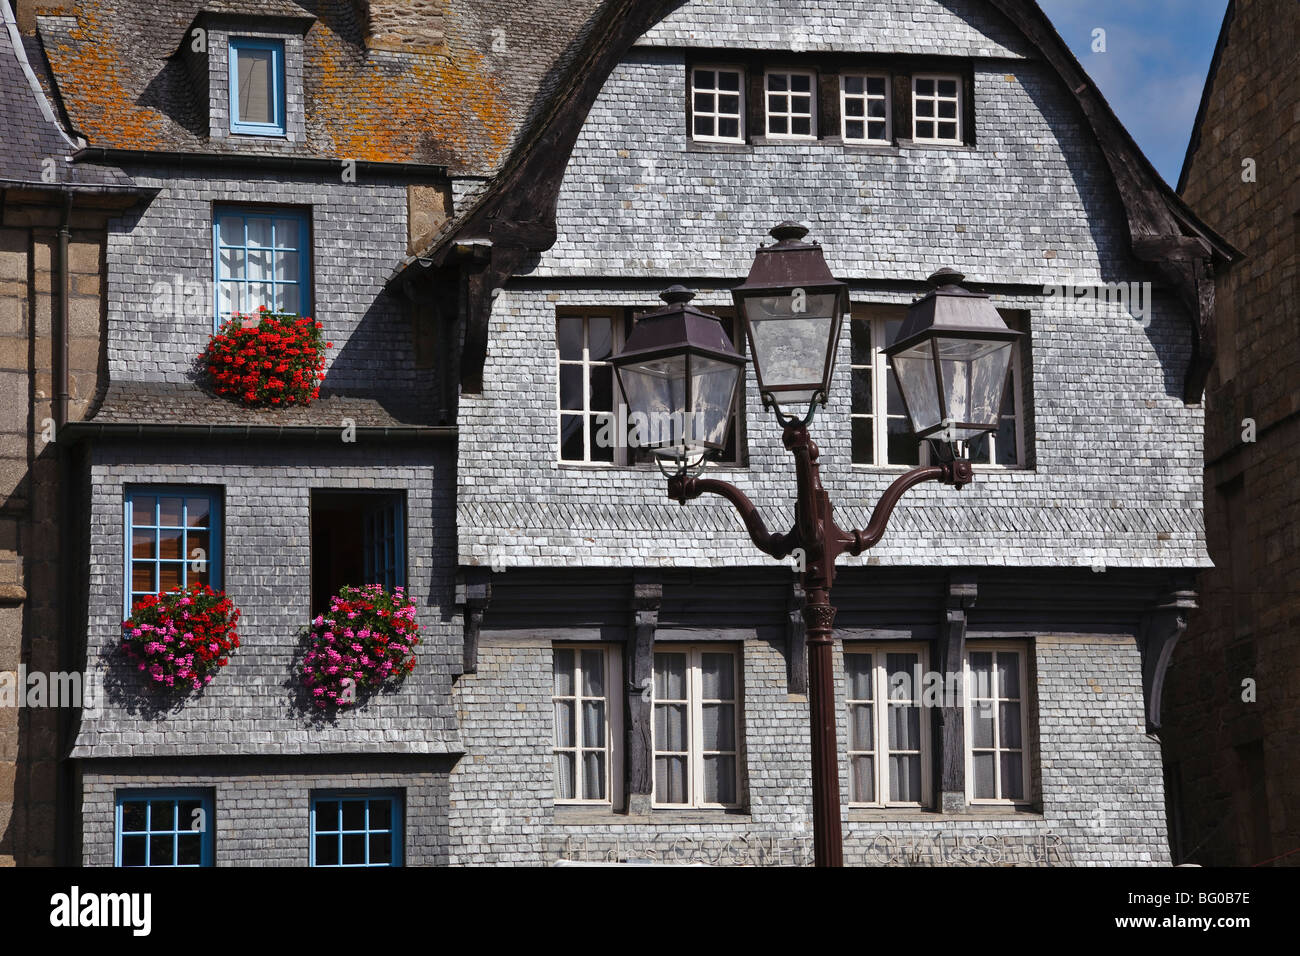 Architectural detail of shop buildings at Guingamp, Côte d’Armor, Brittany, France Stock Photo